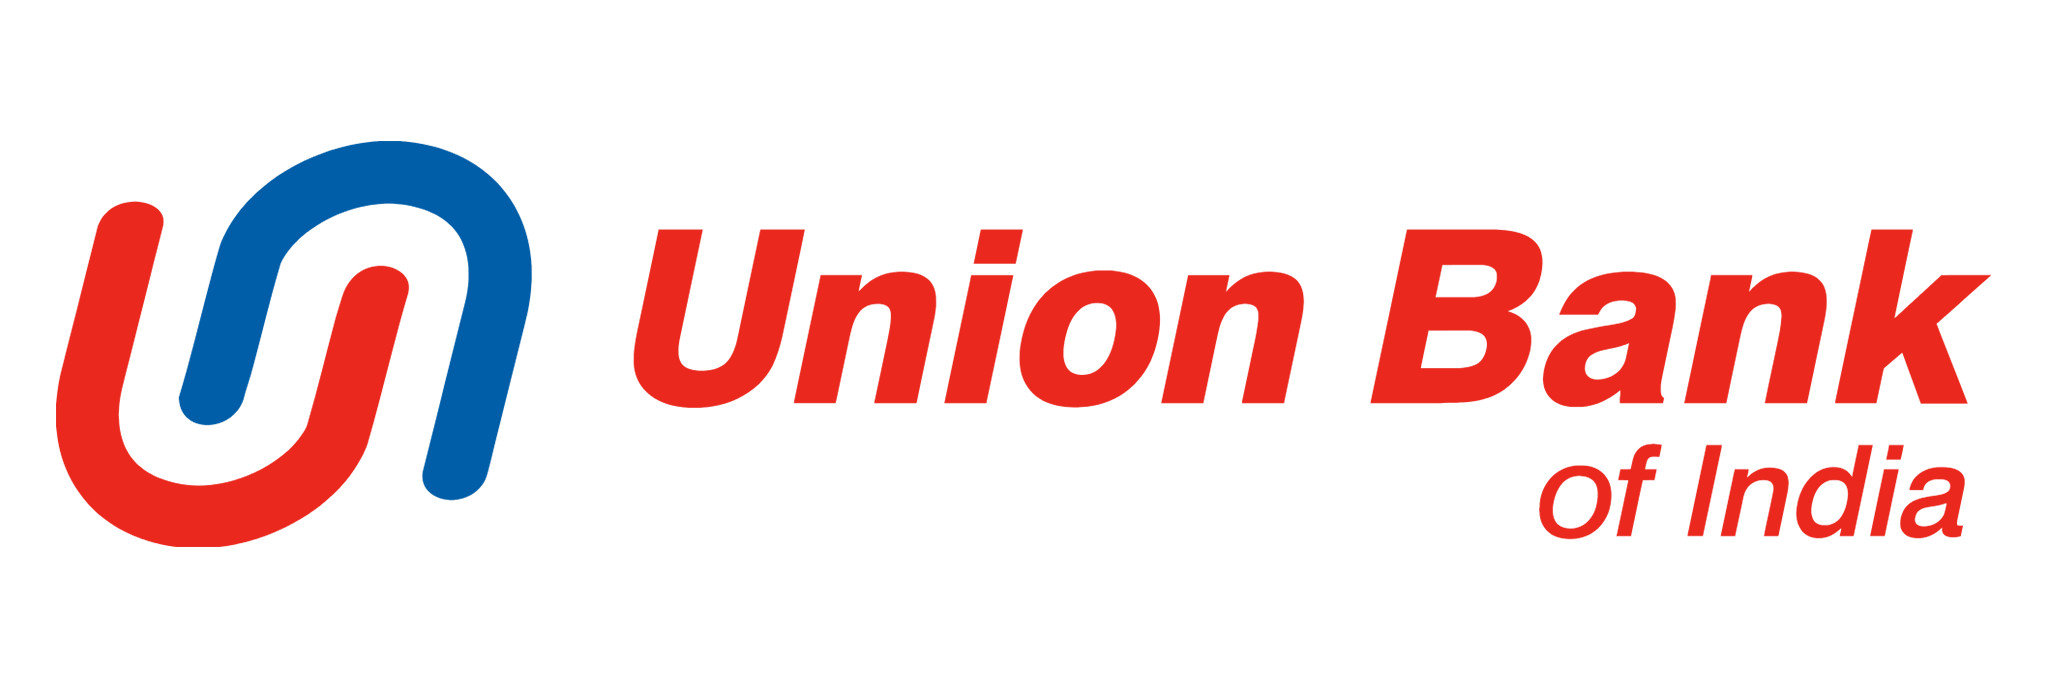 Union bank of india pnglogo